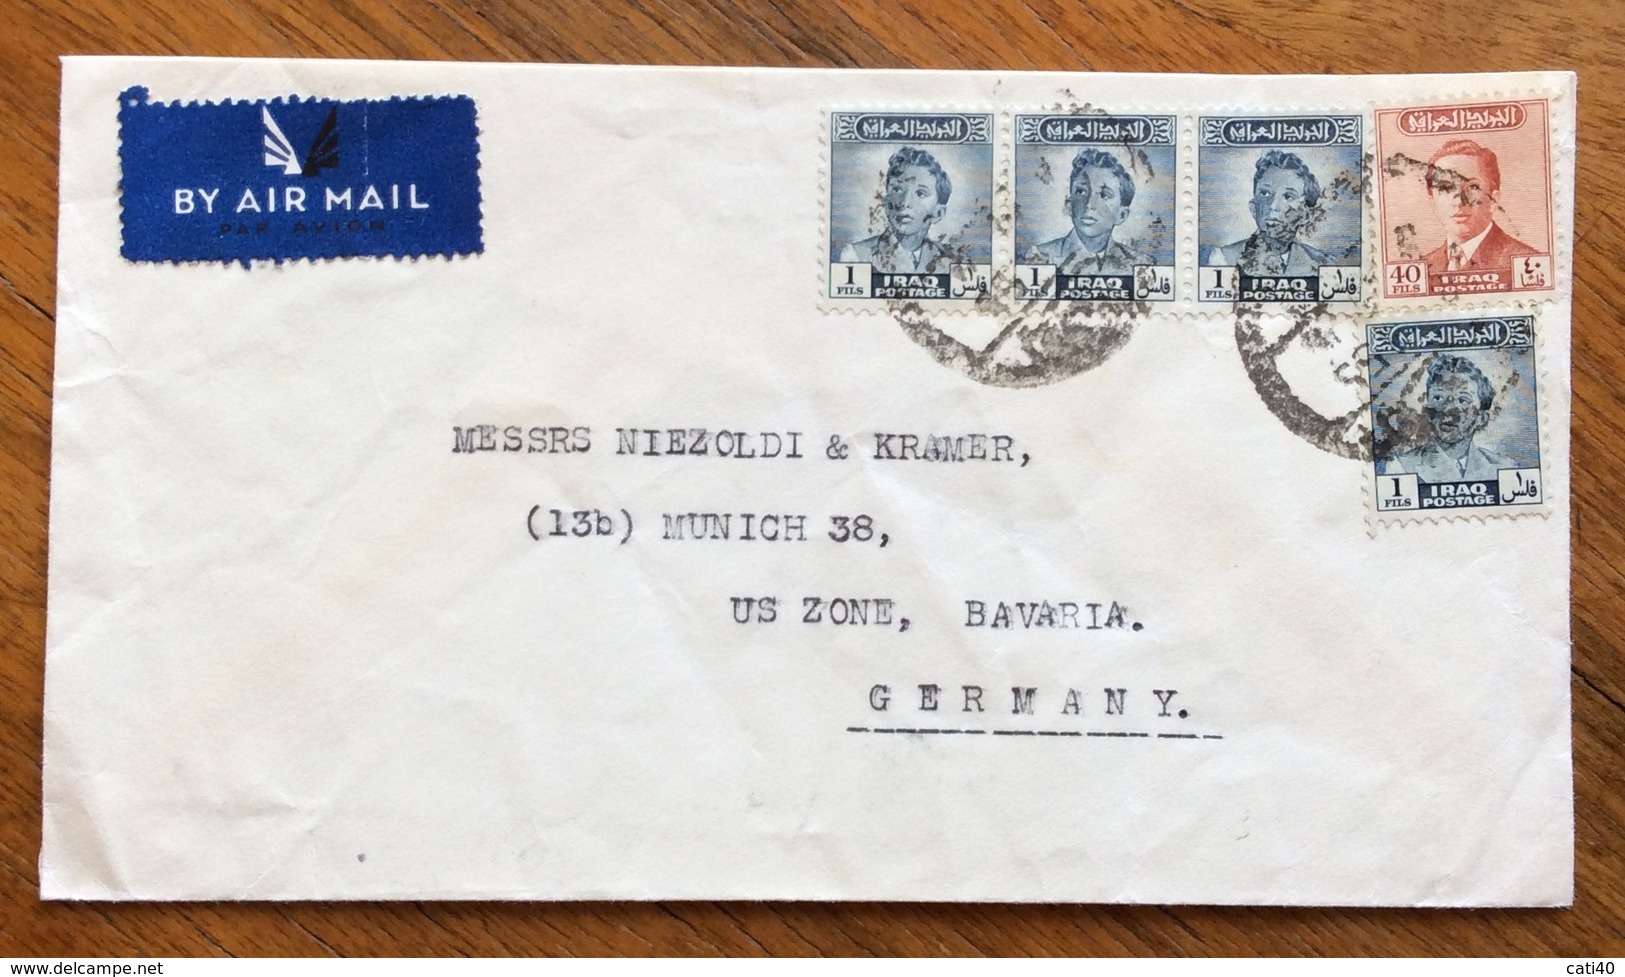 IRAQ  ENVELOPE COVER AIR MAIL   FROM BAGHDAD  TO  MONACO GERMANY  1955 - Irak